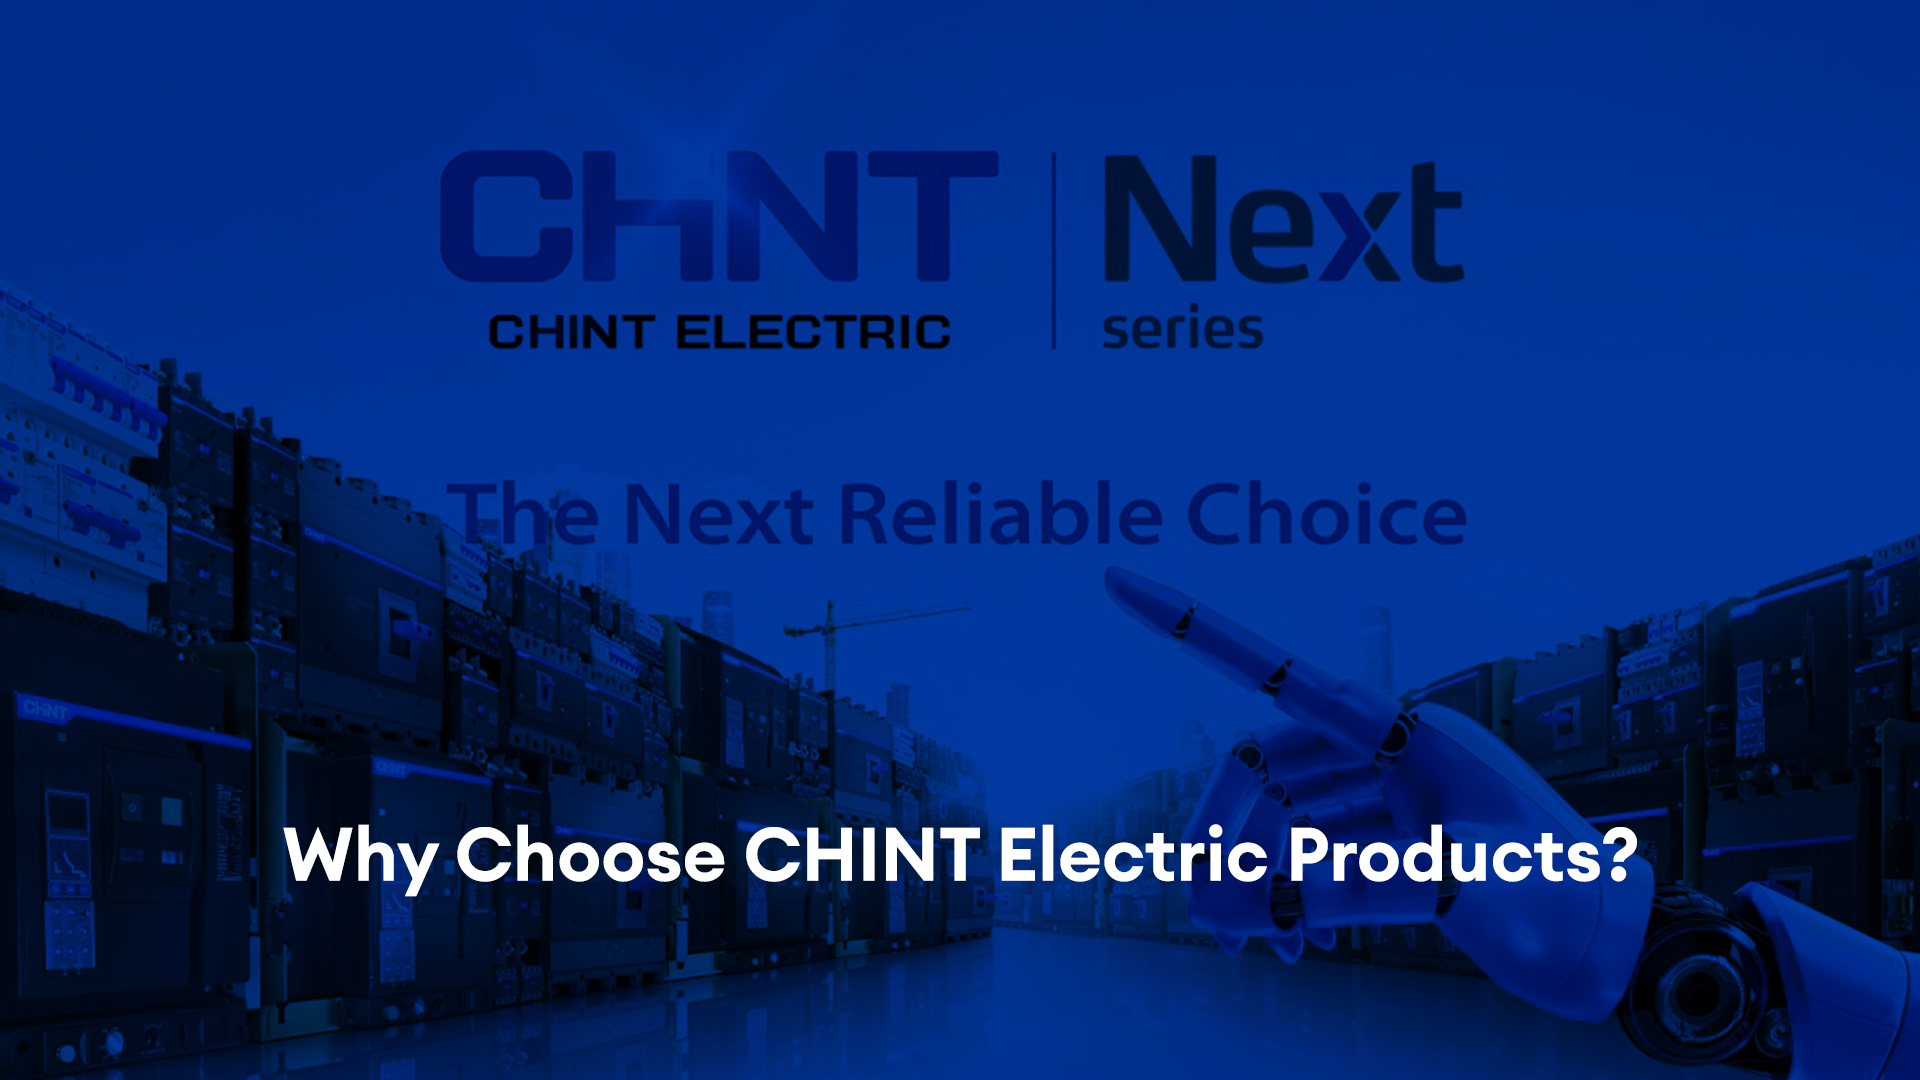 HOW PRIME GROUP & CHINT ARE SHAPING THE ELECTRICAL INFRASTRUCTURE?